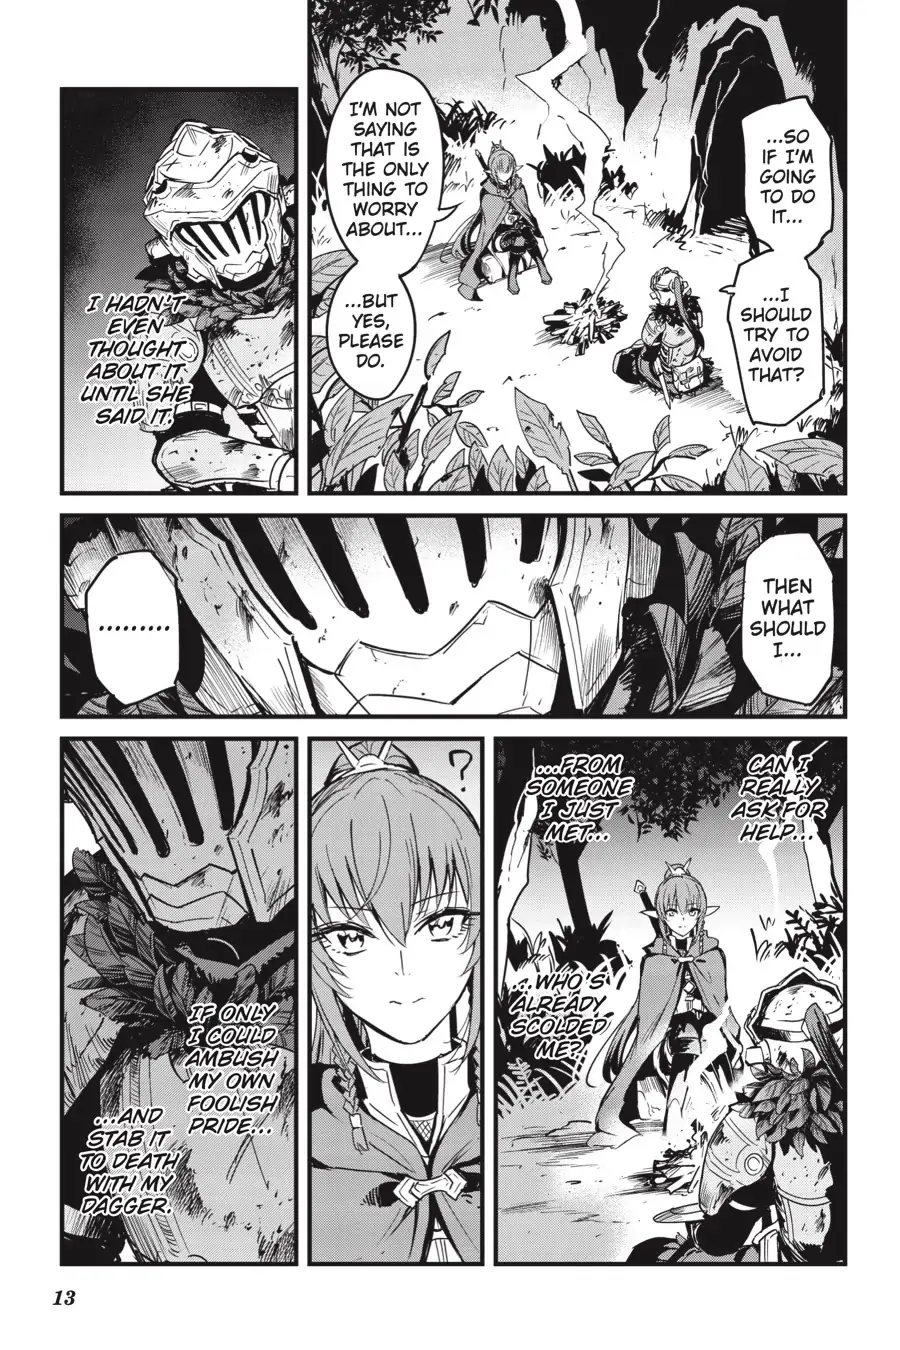 Goblin Slayer: Side Story Year One chapter 81